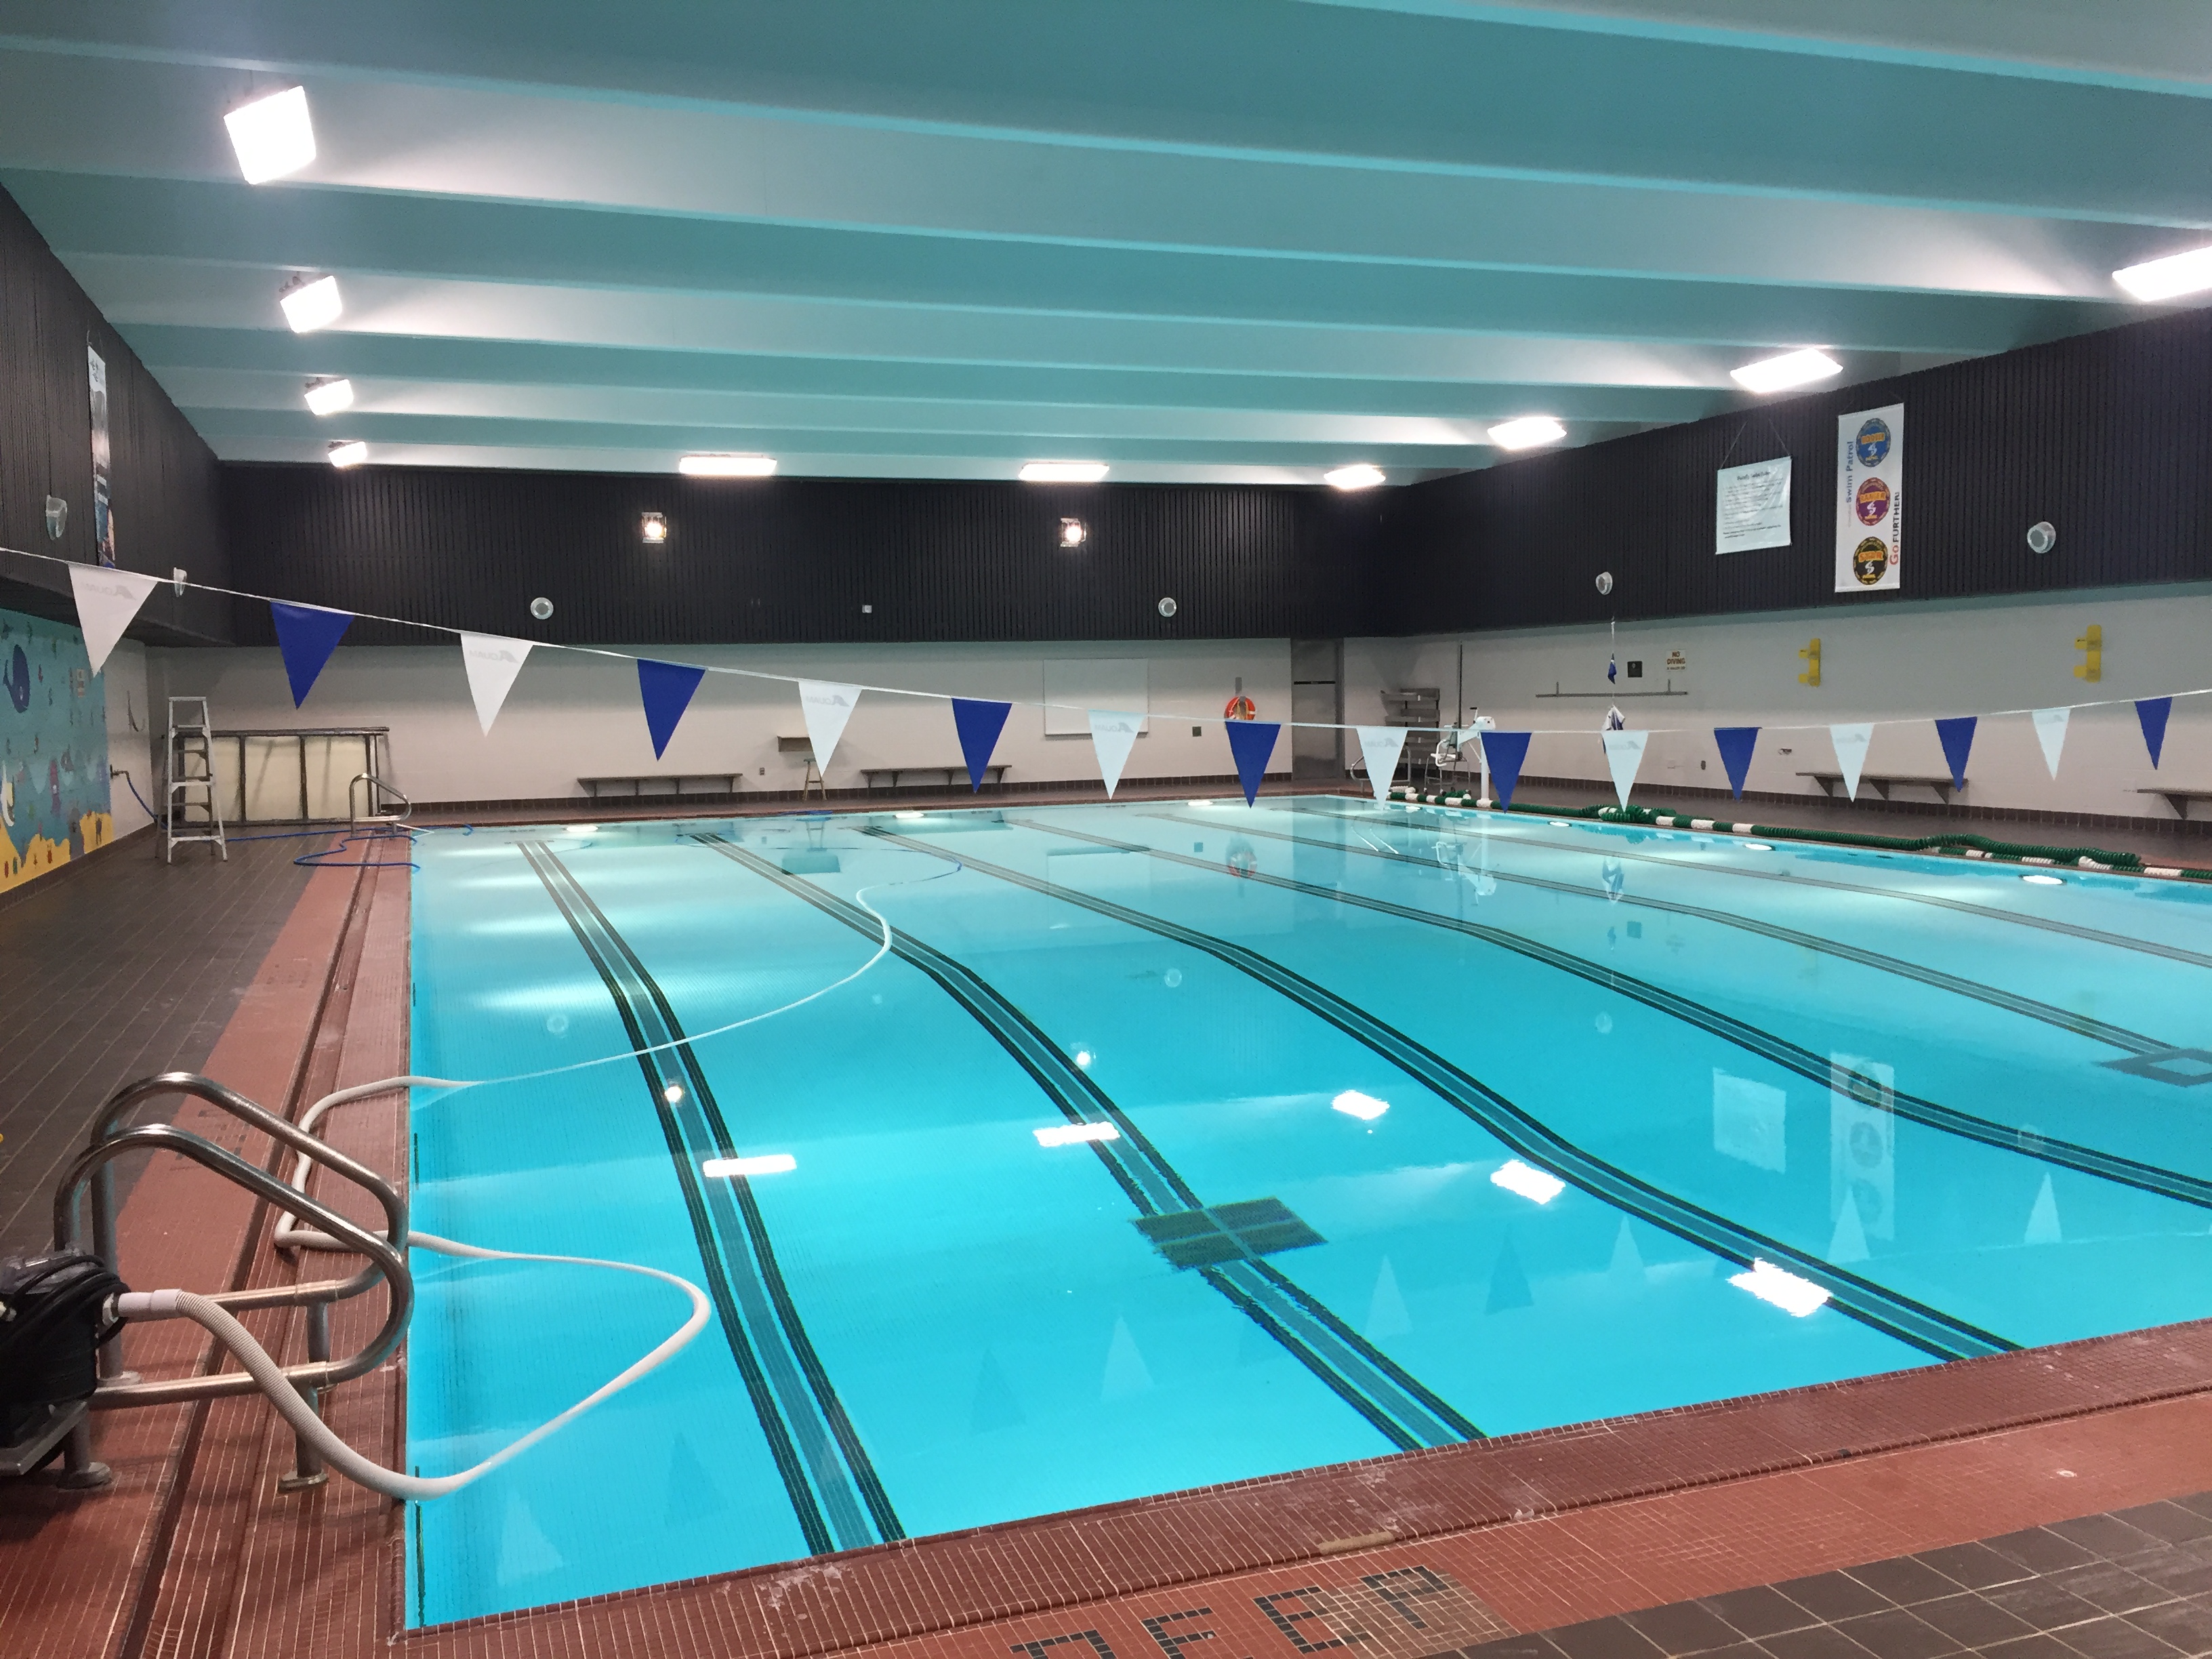 The Education Pool sits under refreshing new light following its LED retrofit.